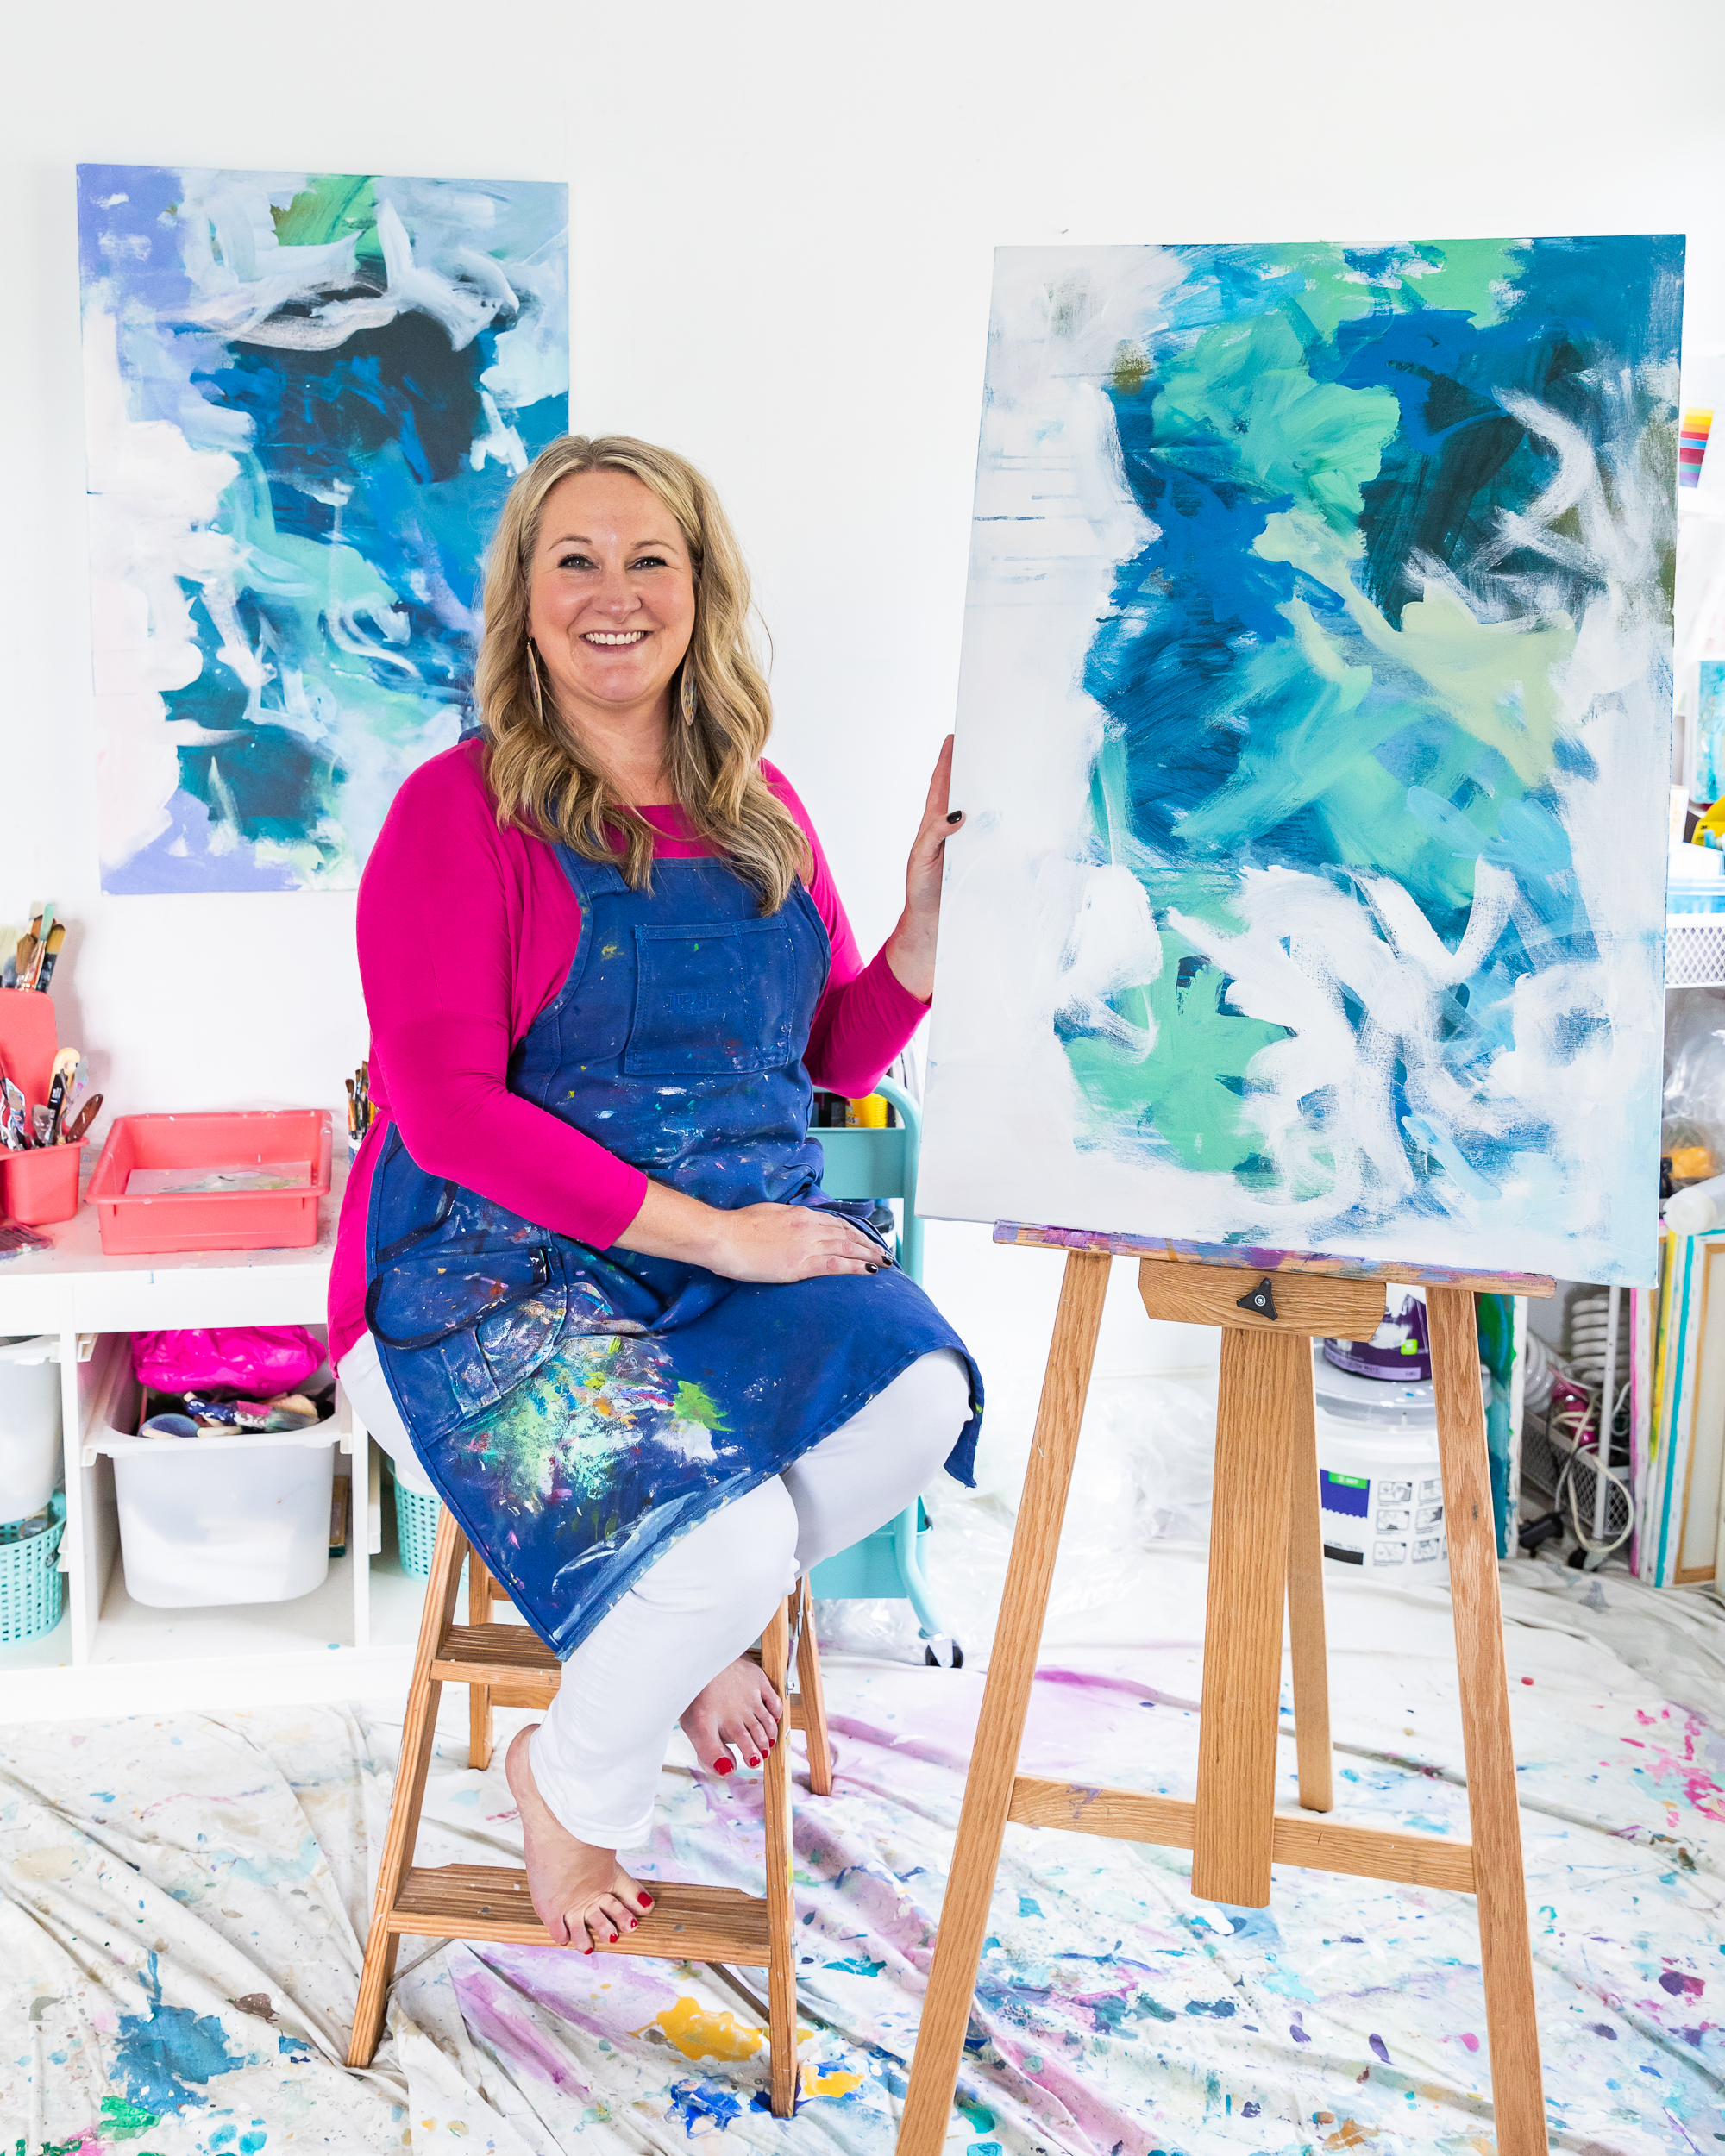 Heather Eck is an artist in her studio sitting on a bench next to a canvas with a blue and white painting.